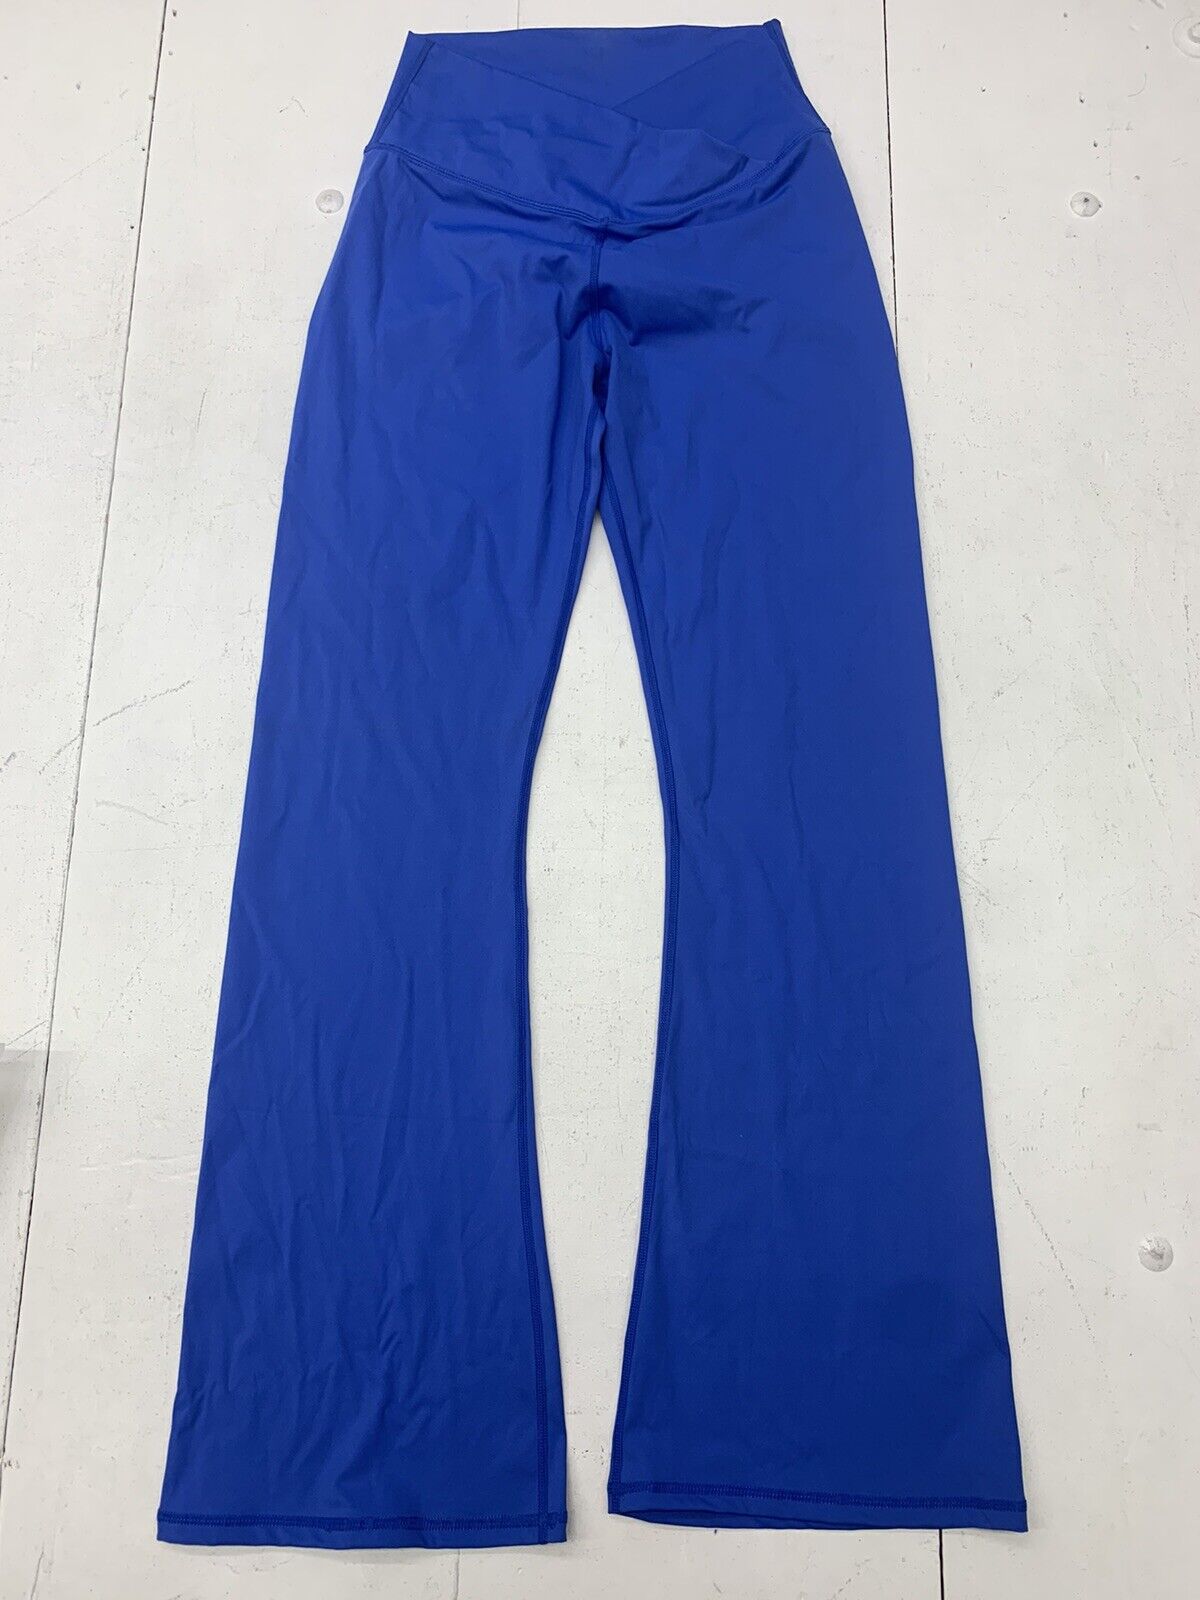 Unbranded Womens Blue High Waisted Athletic Leggings Size Large - beyond  exchange